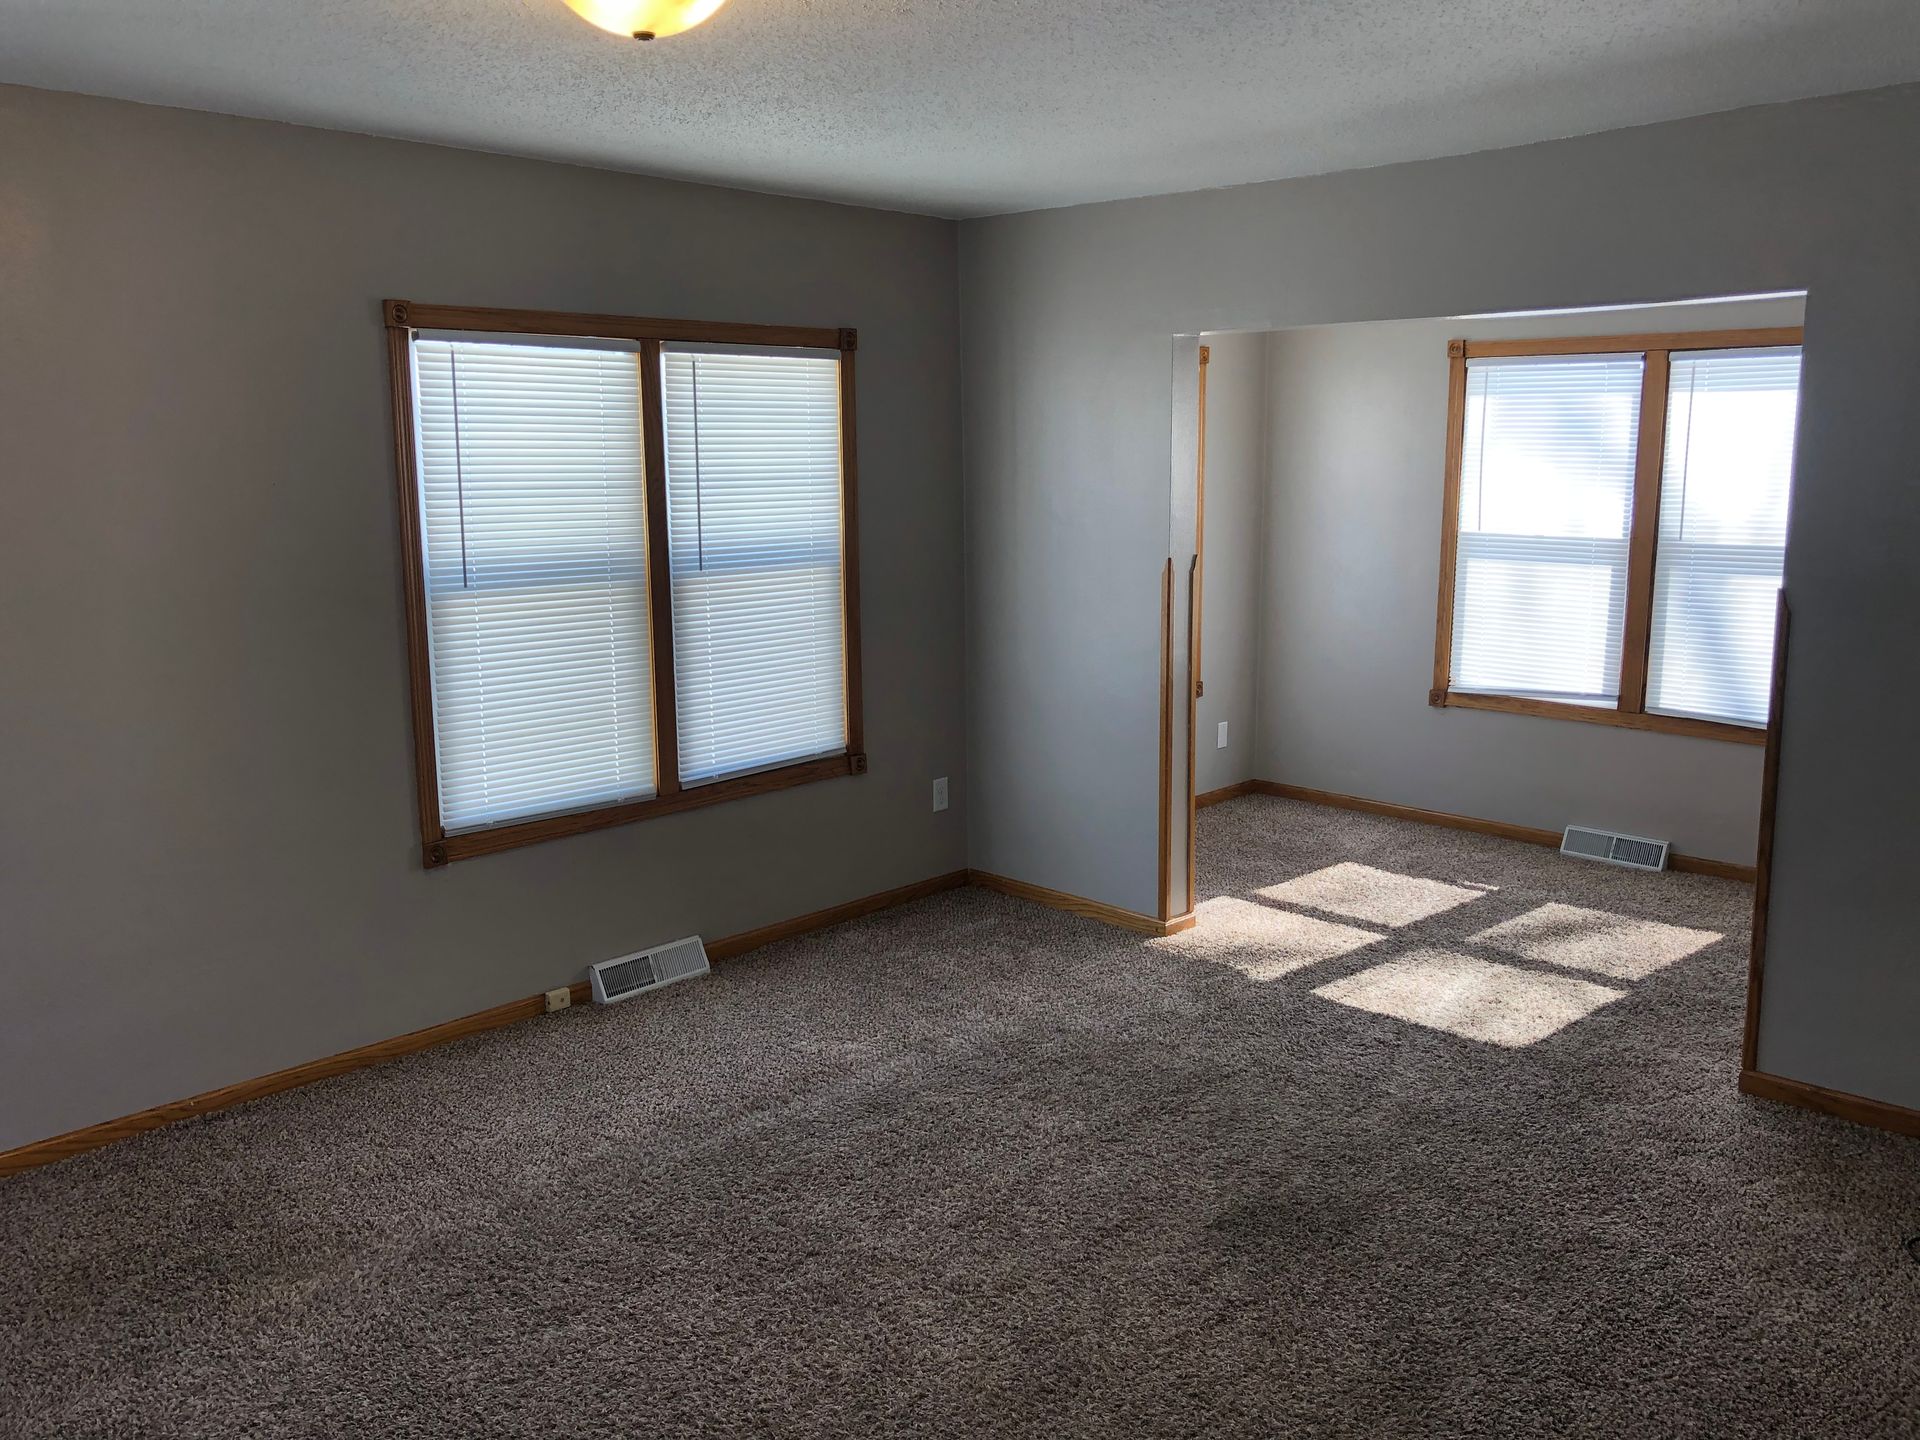 An empty living room with a carpeted floor and two windows.